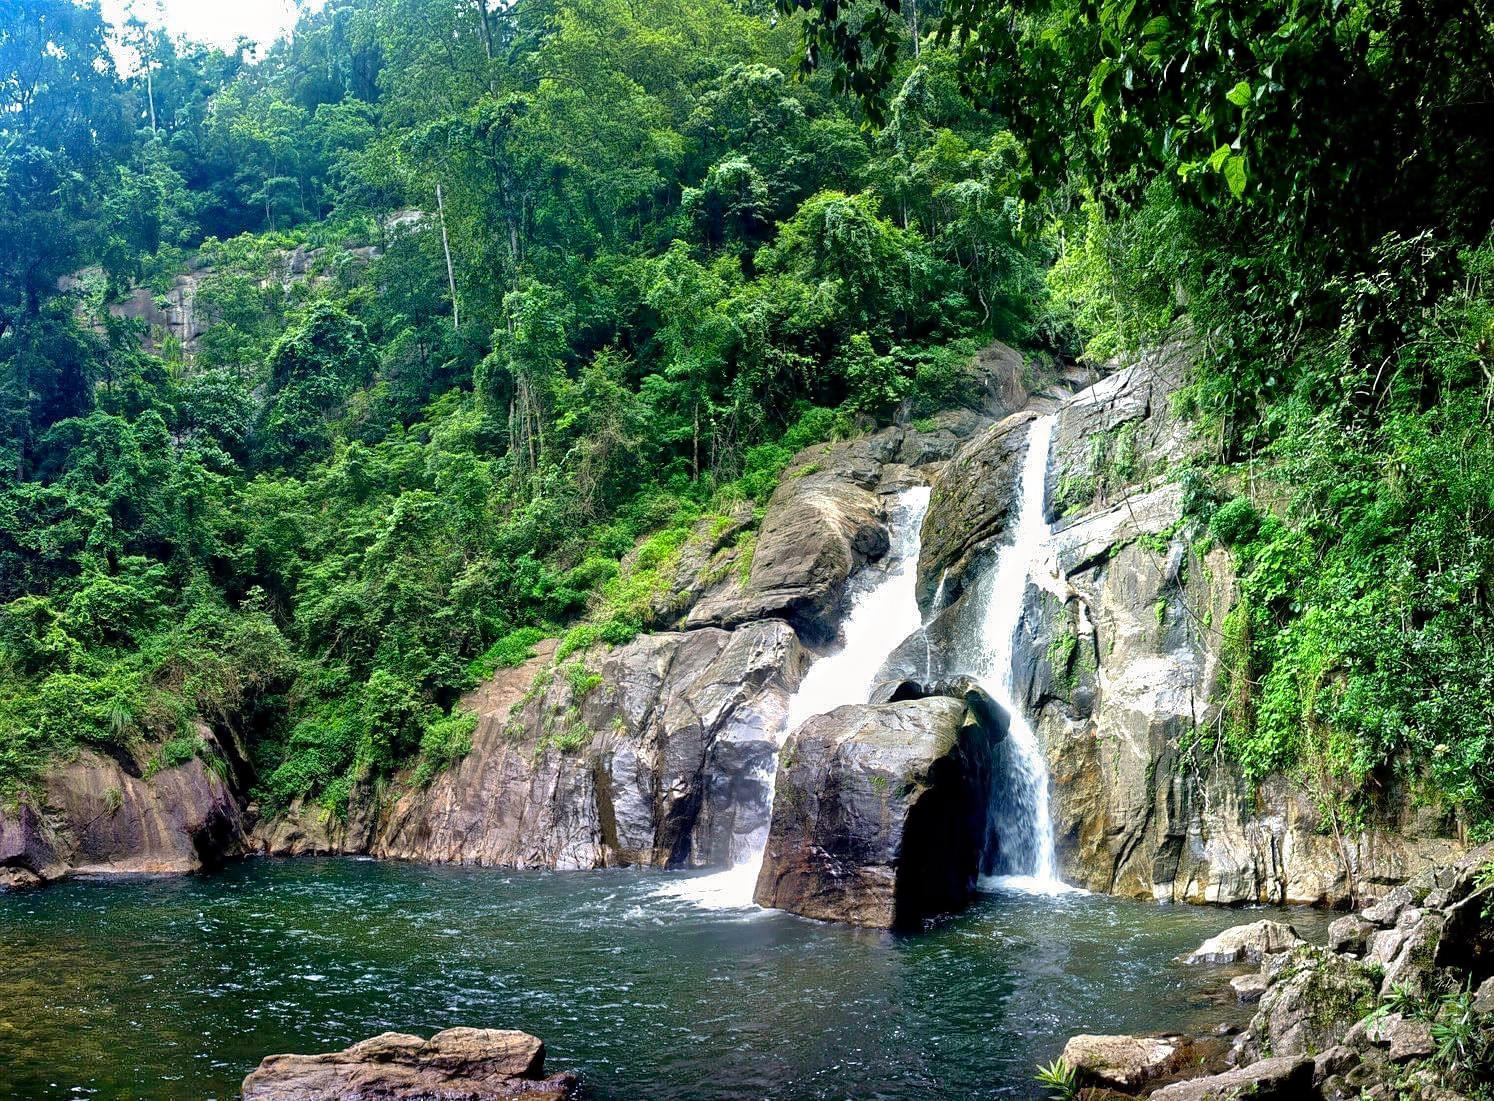 Meenmutty Waterfalls Overview